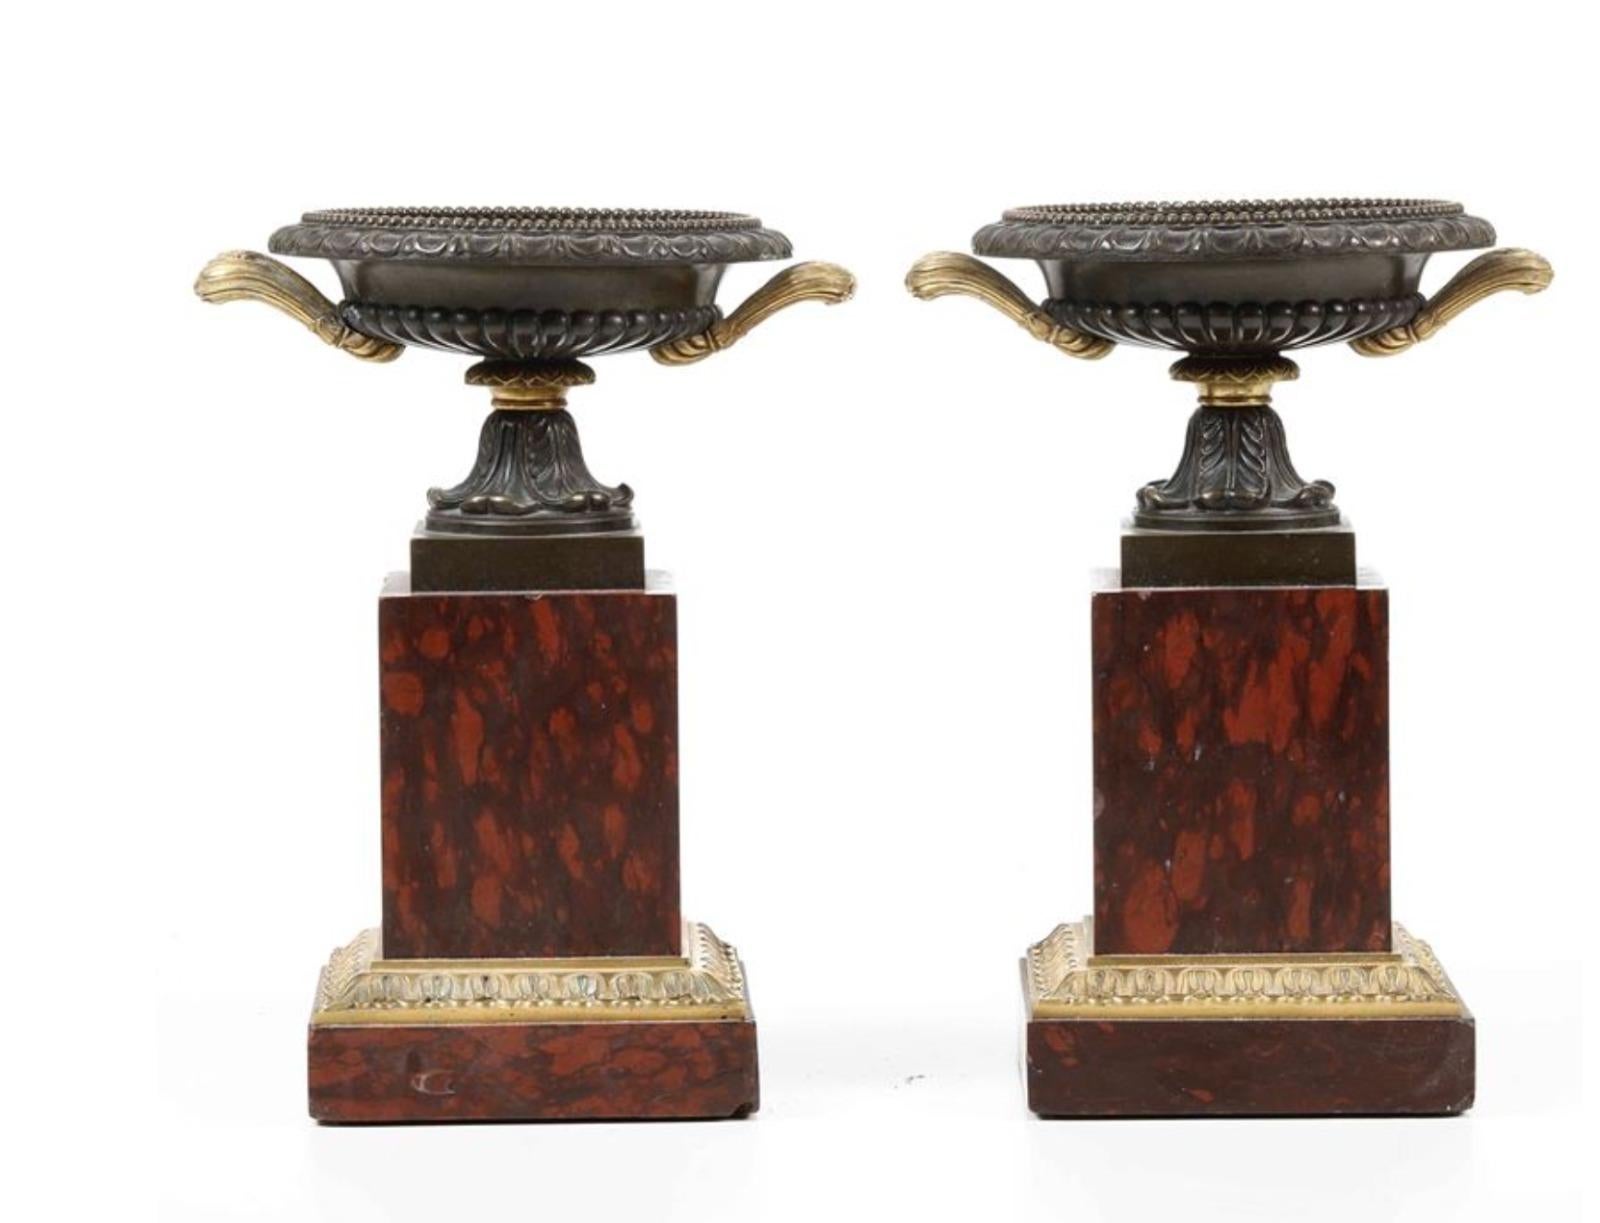 Pair of Vases in Bronze and Red Marble,
France
19th Century
H: 27
good conditions
Never restored